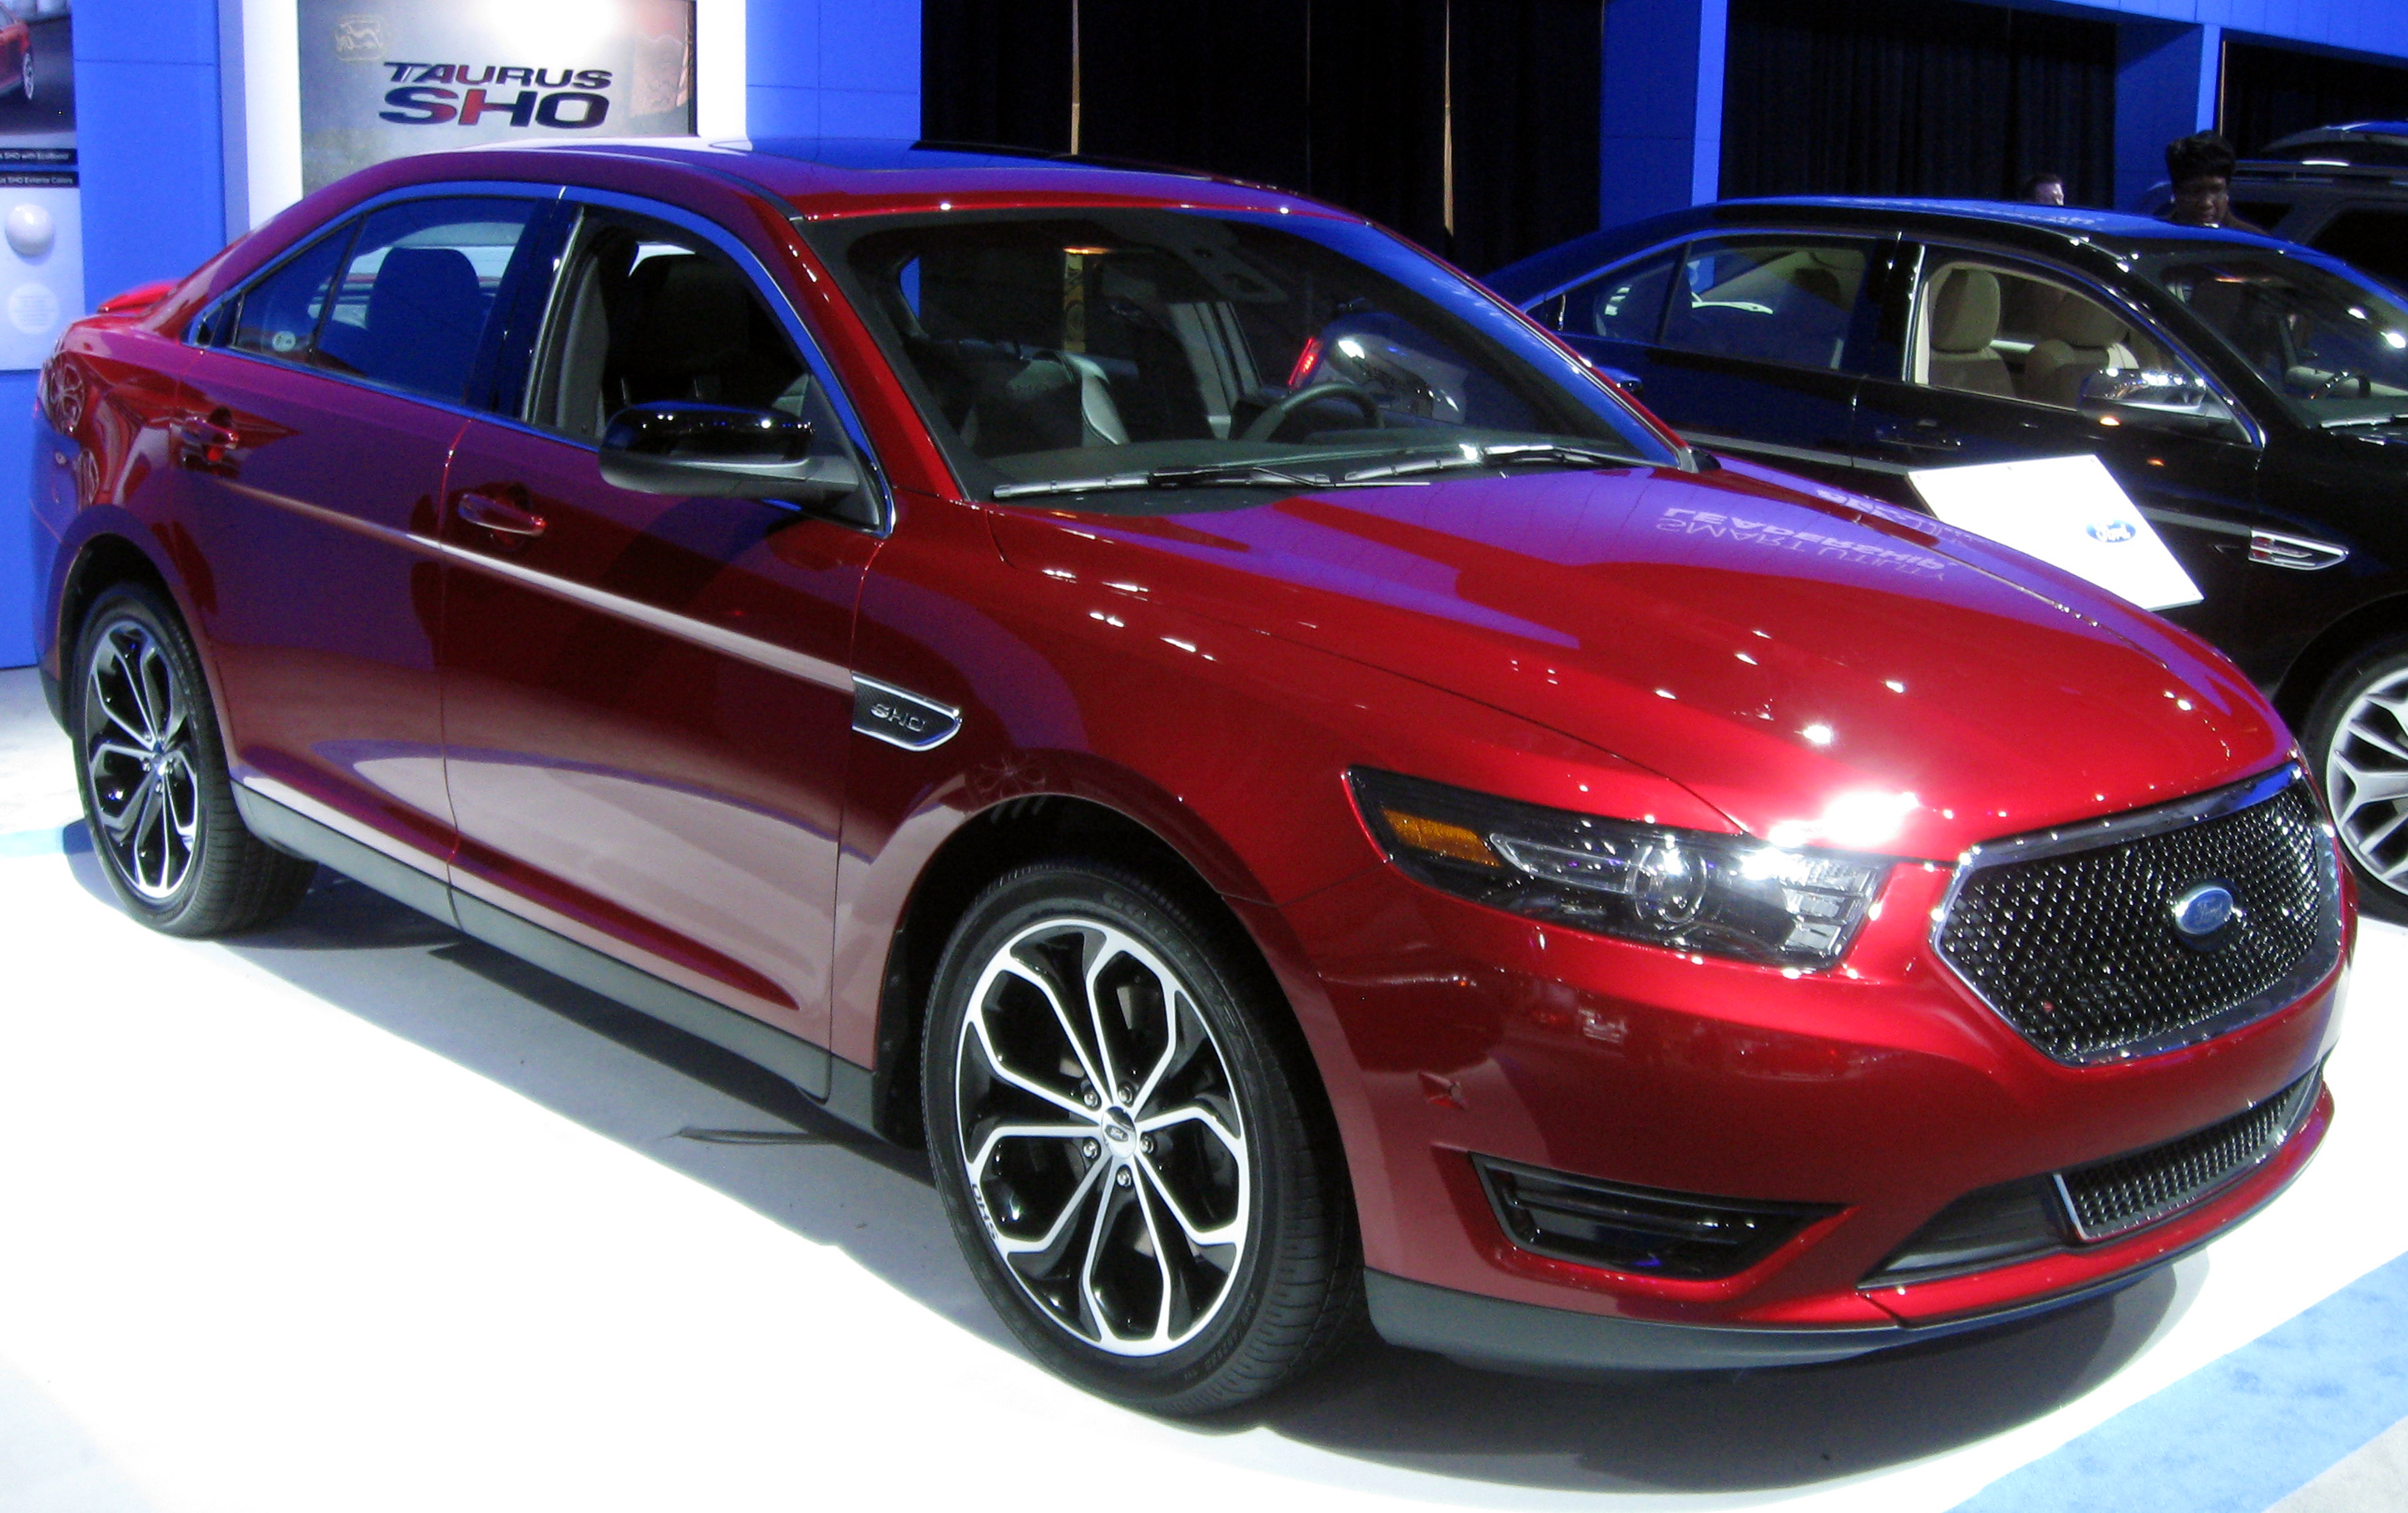 Nice wallpapers Ford Taurus Sho 2896x1820px